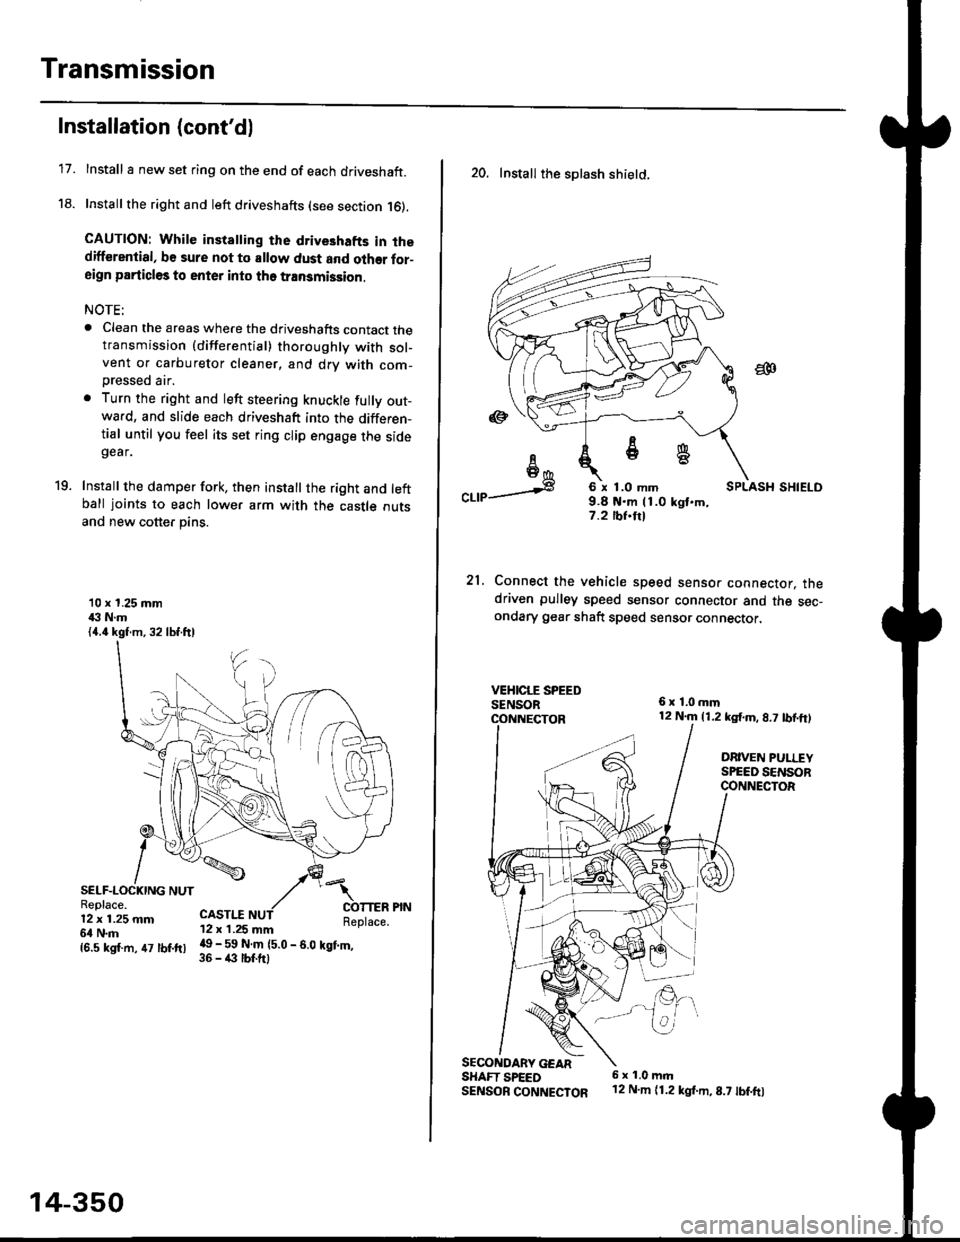 HONDA CIVIC 2000 6.G User Guide Transmission
17.
Installation (contd)
Install I new set ring on the end of each driveshaft.
Install the right and left driveshafts (see section 16).
CAUTION: While instatling the drive3hafts in thedi